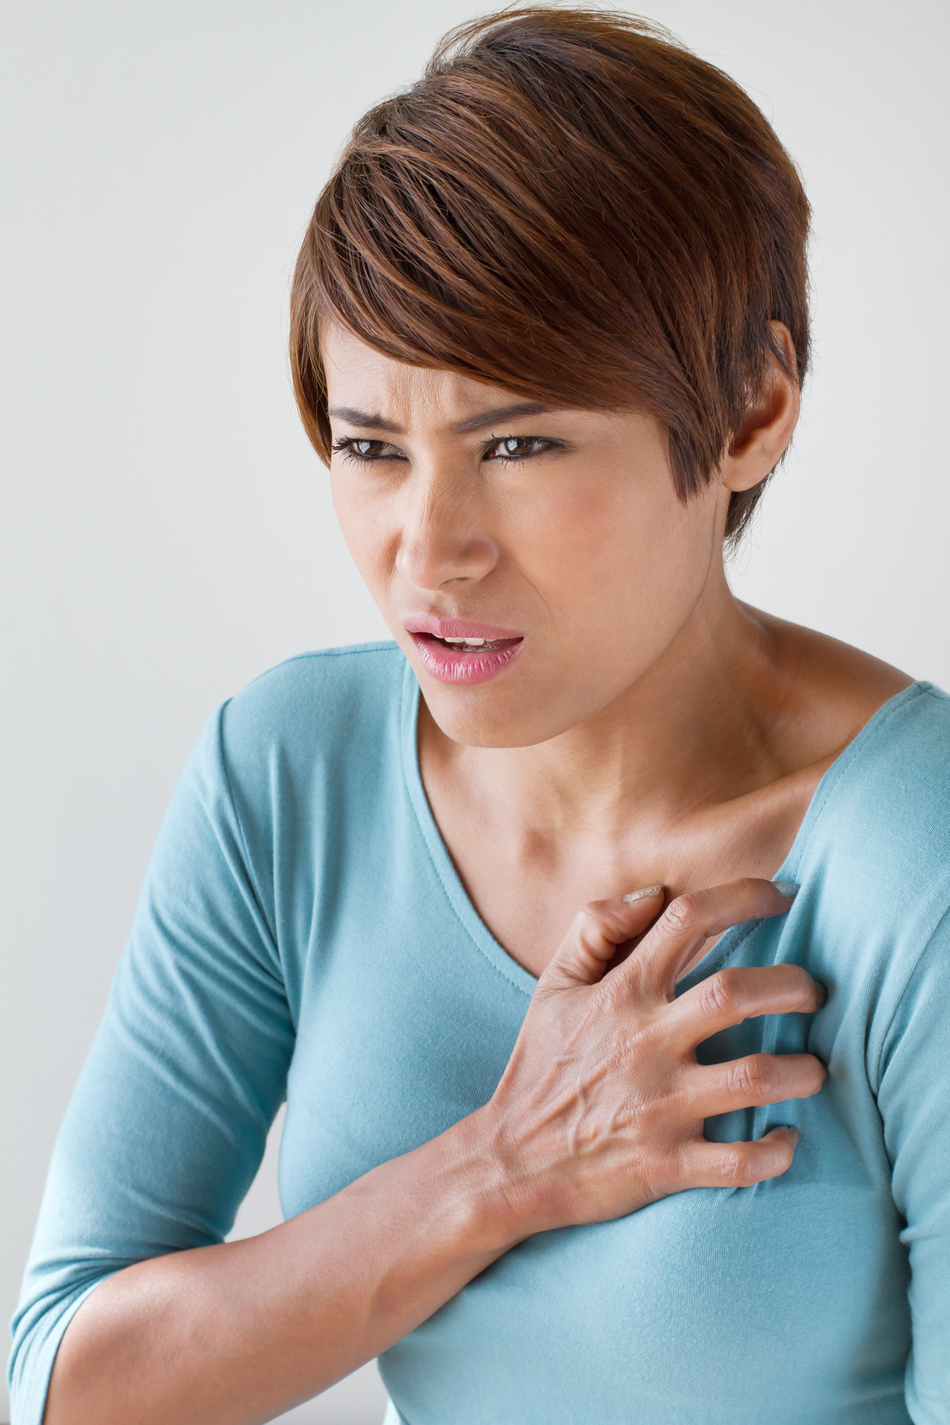 Are Heart Attacks on the Rise in Young Women?